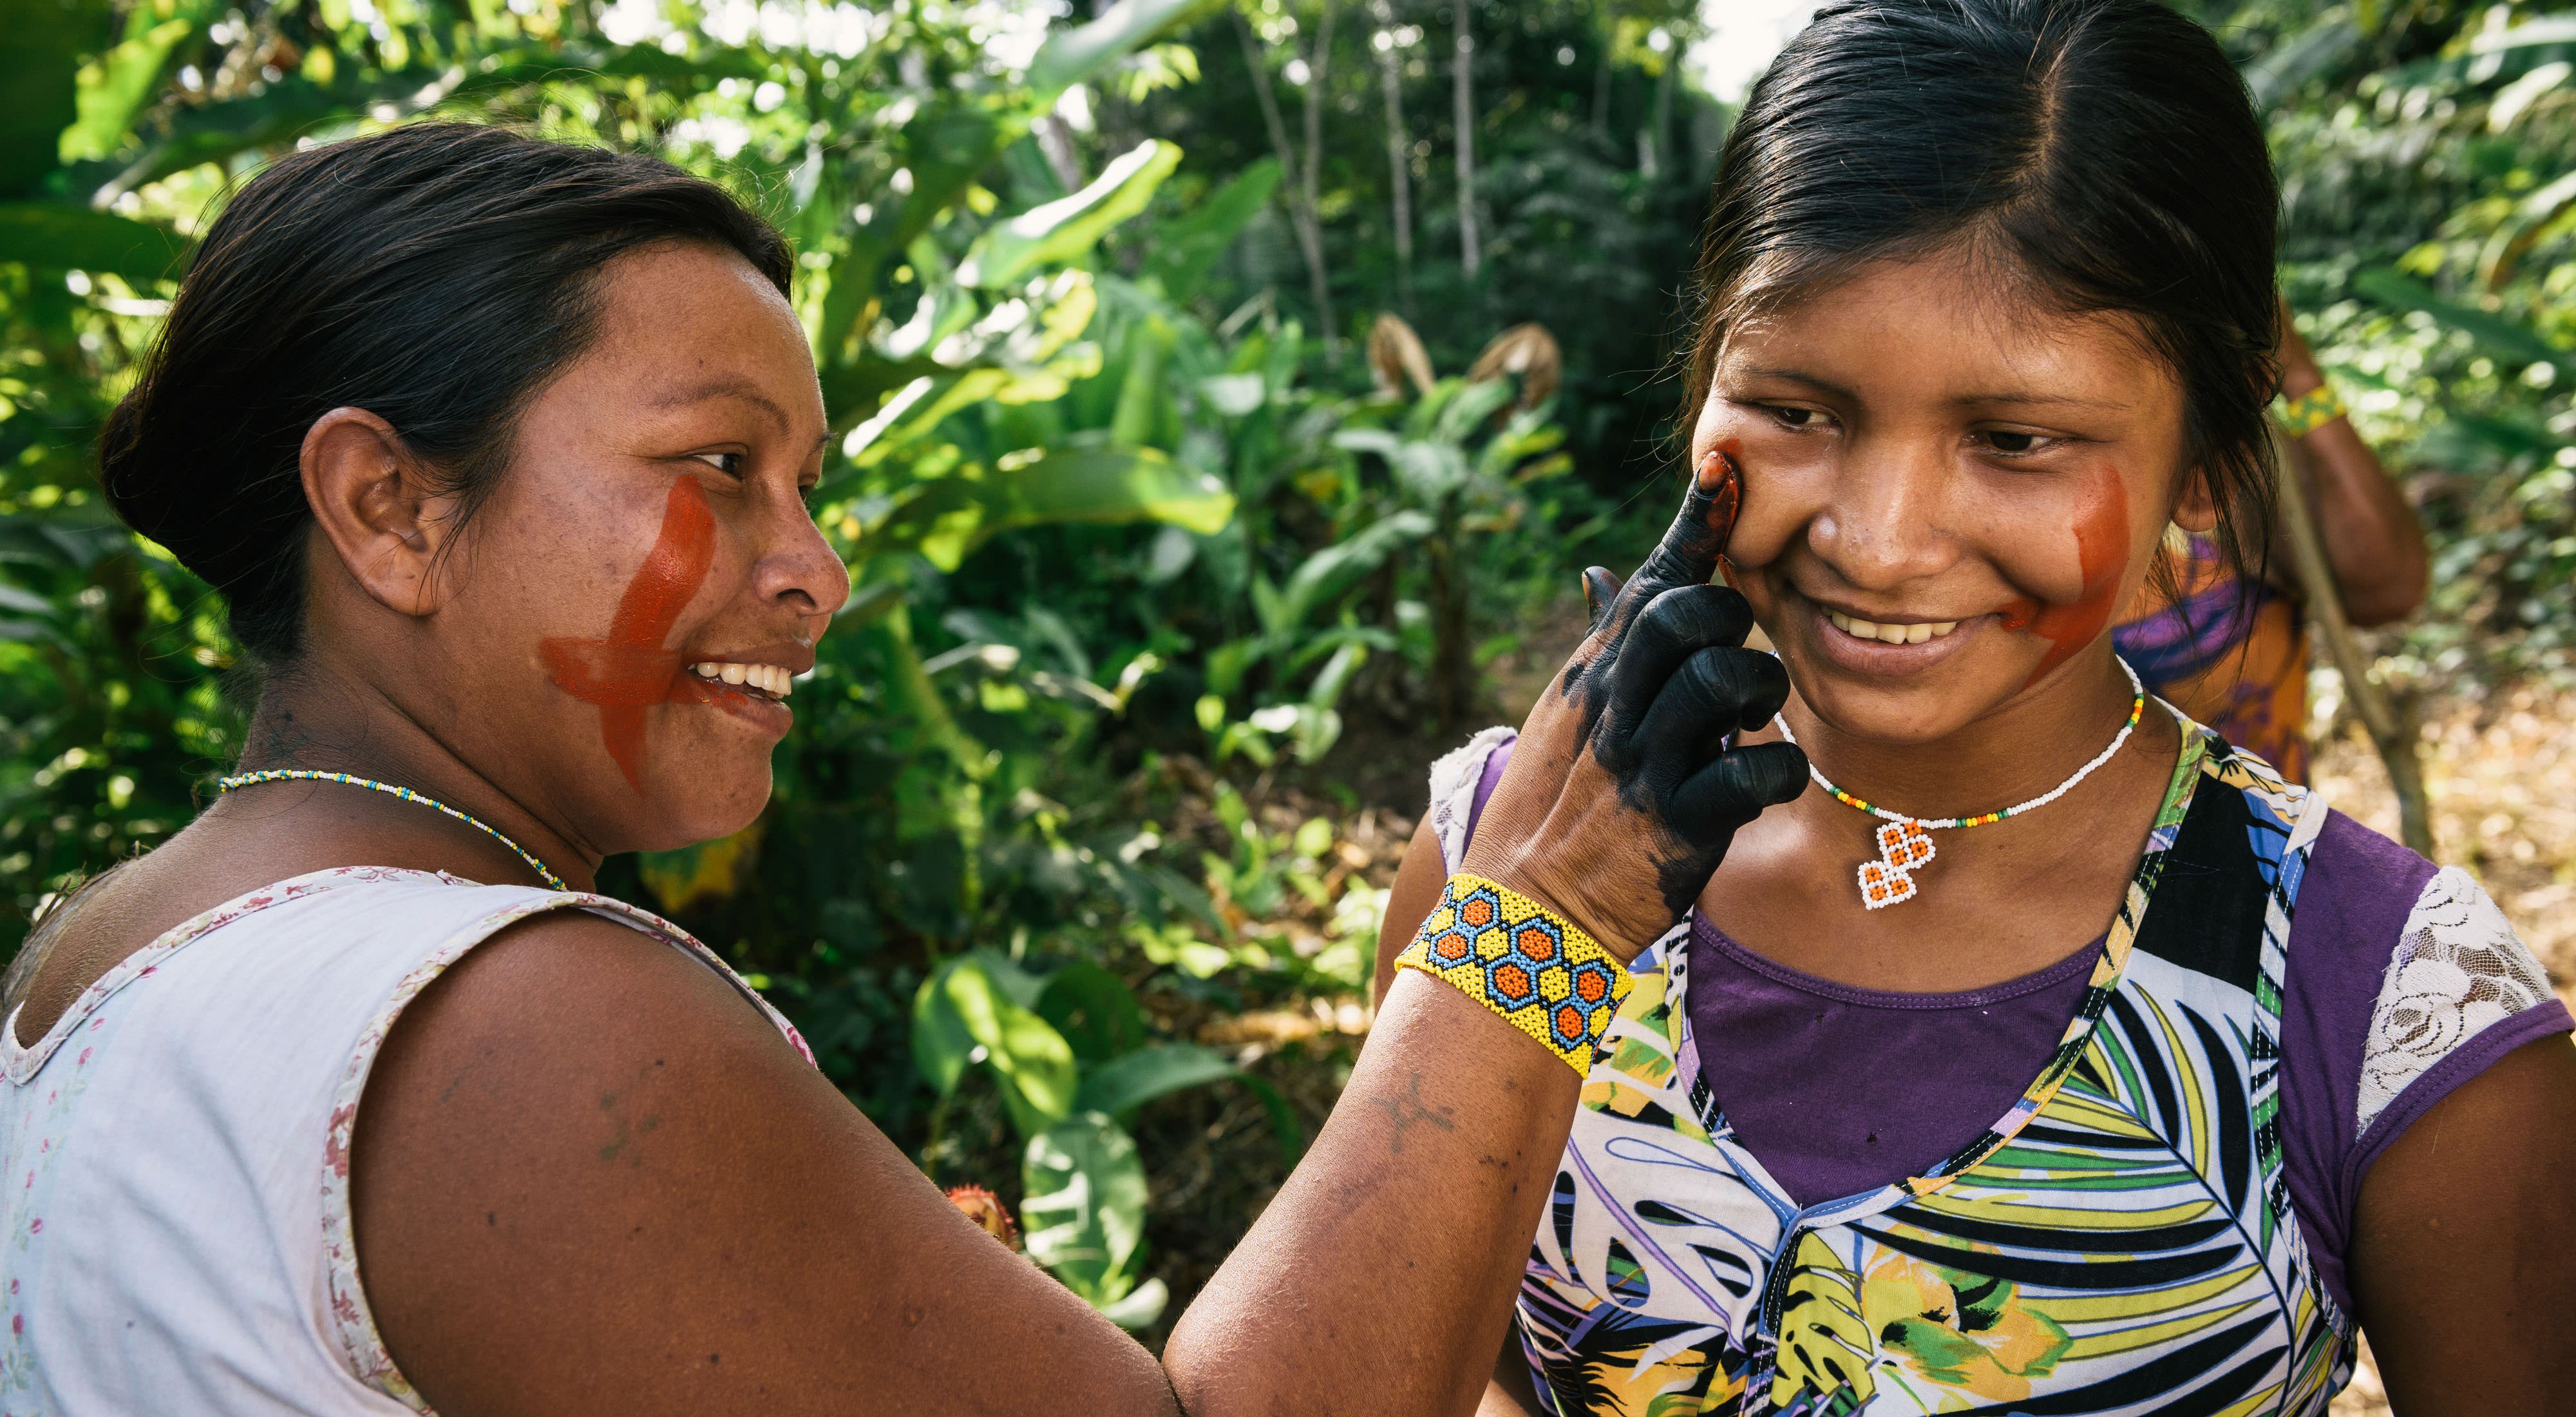 Xikrin women painting each other's faces in a forest near the Pot-Kro Village, Brazil.